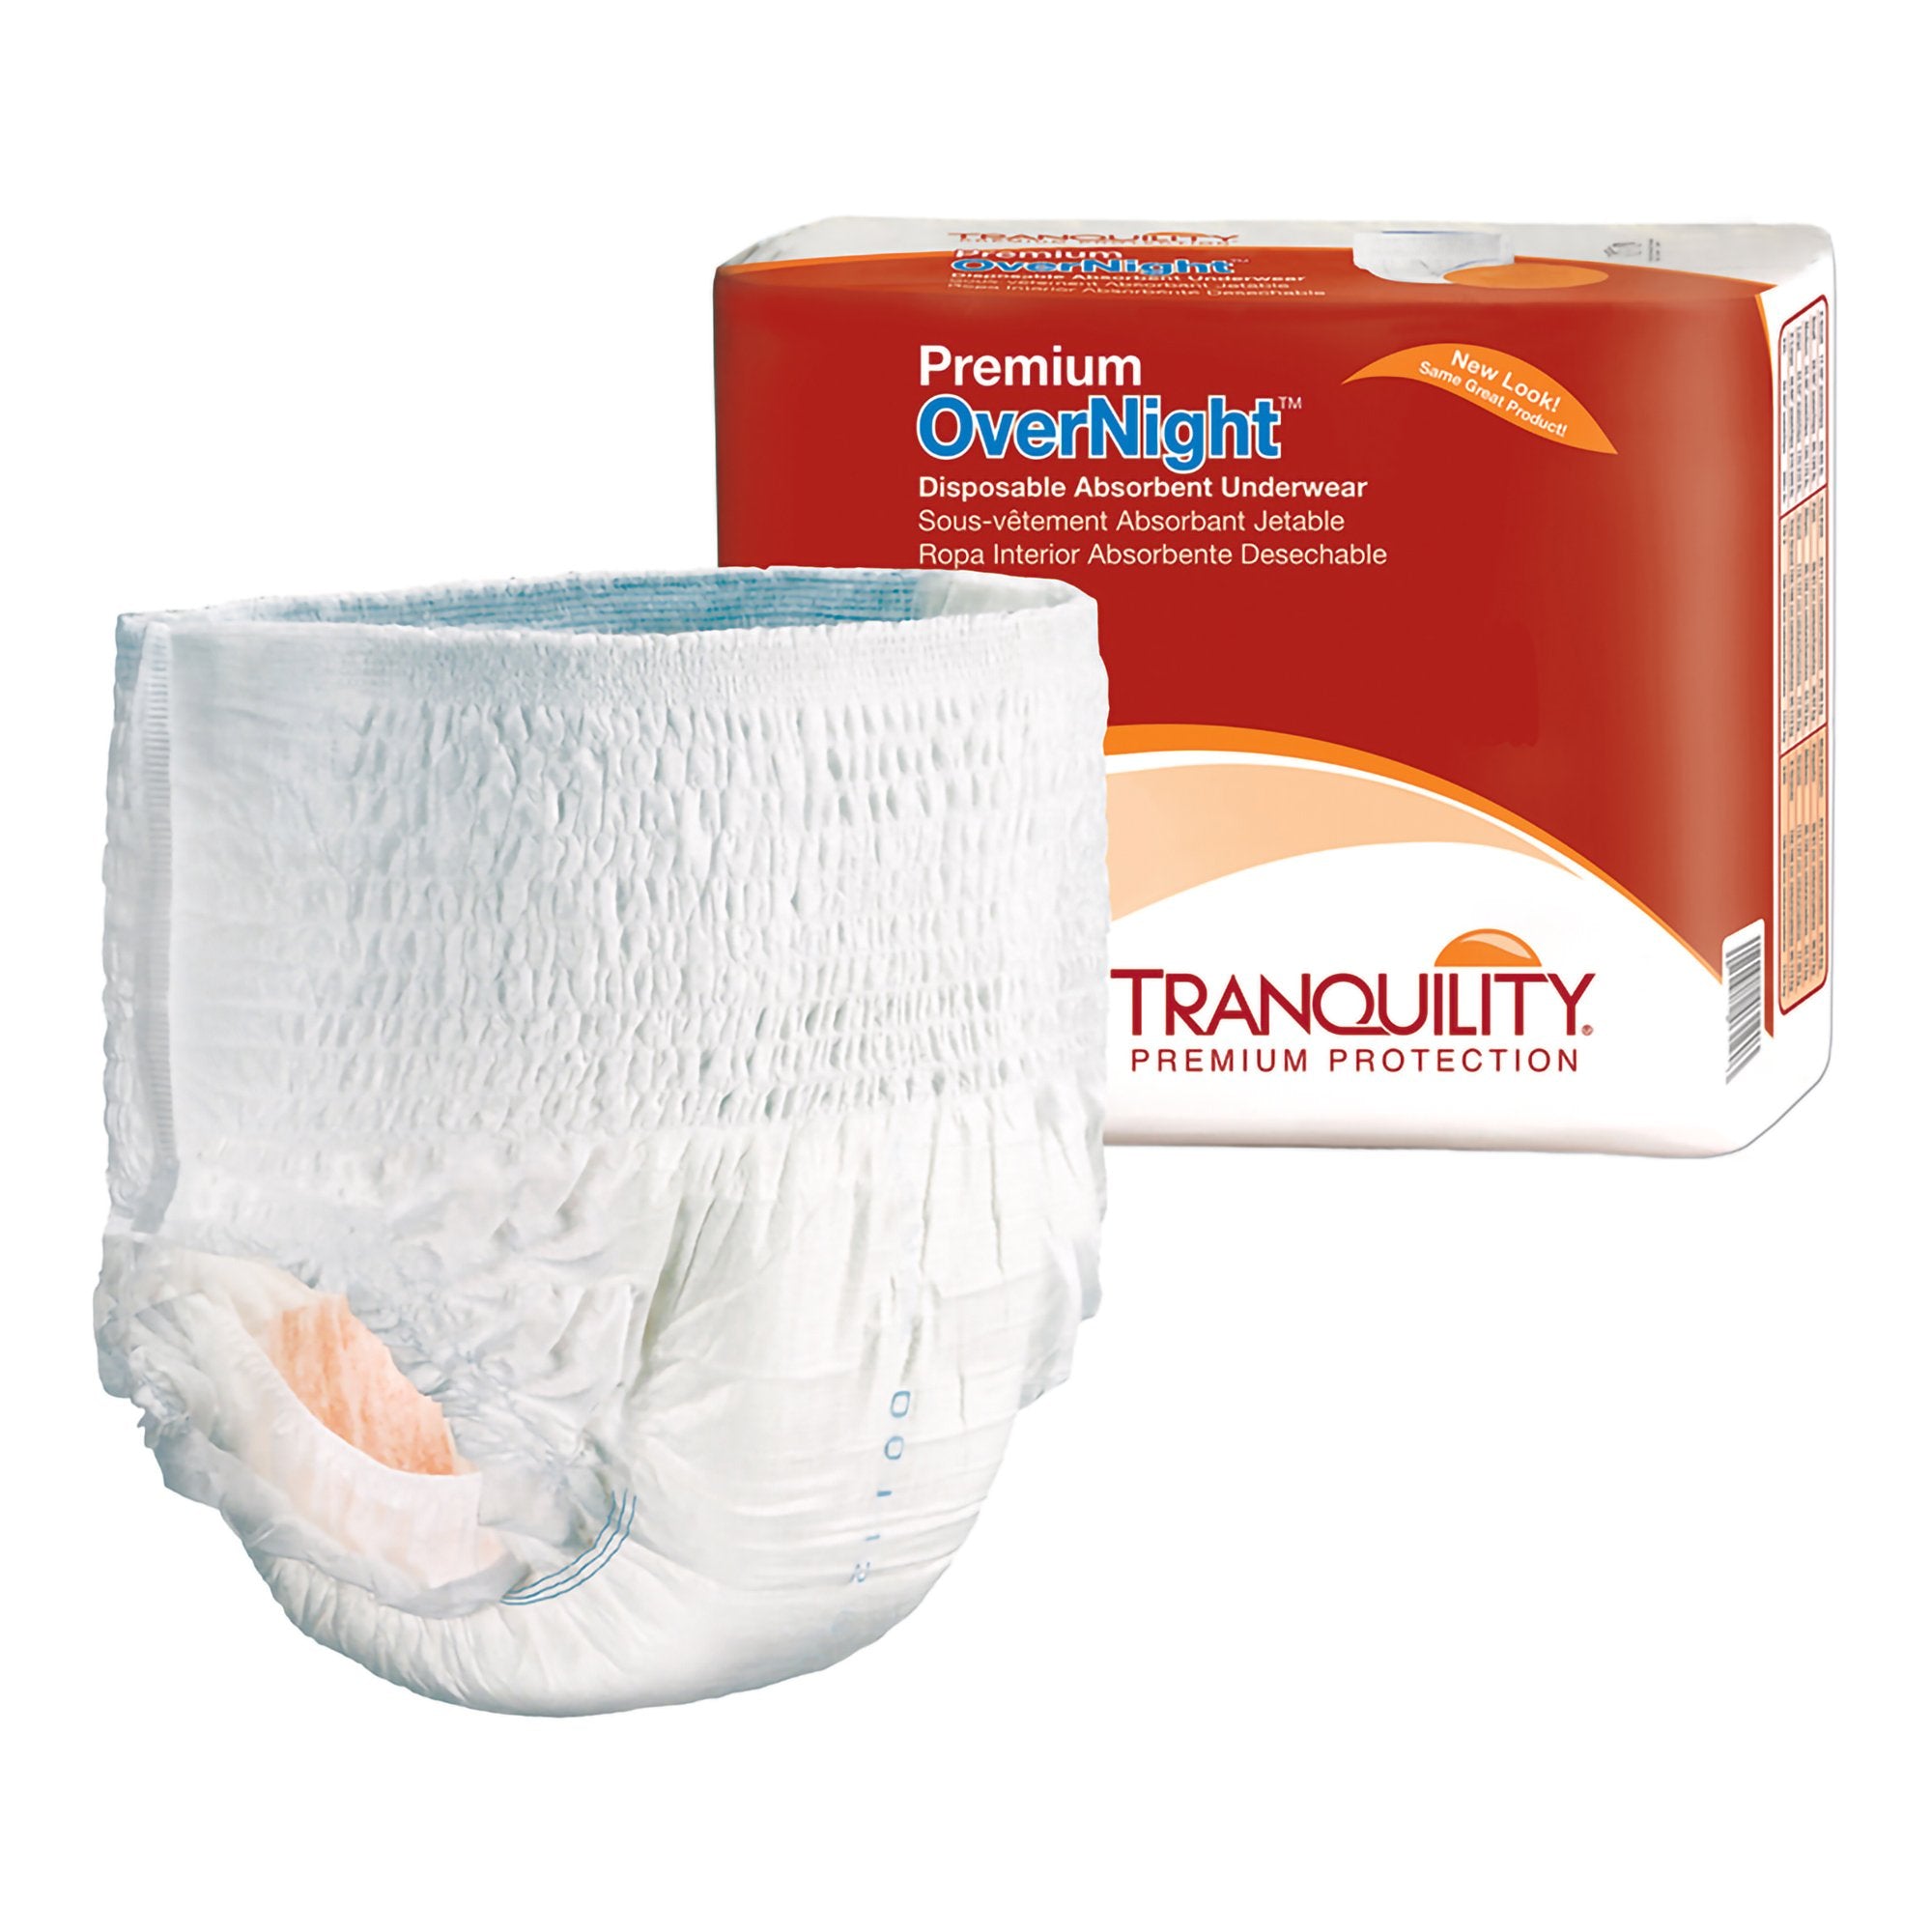 Unisex Adult Absorbent Underwear Tranquility® Premium OverNight™ Pull On with Tear Away Seams X-Large Disposable Heavy Absorbency